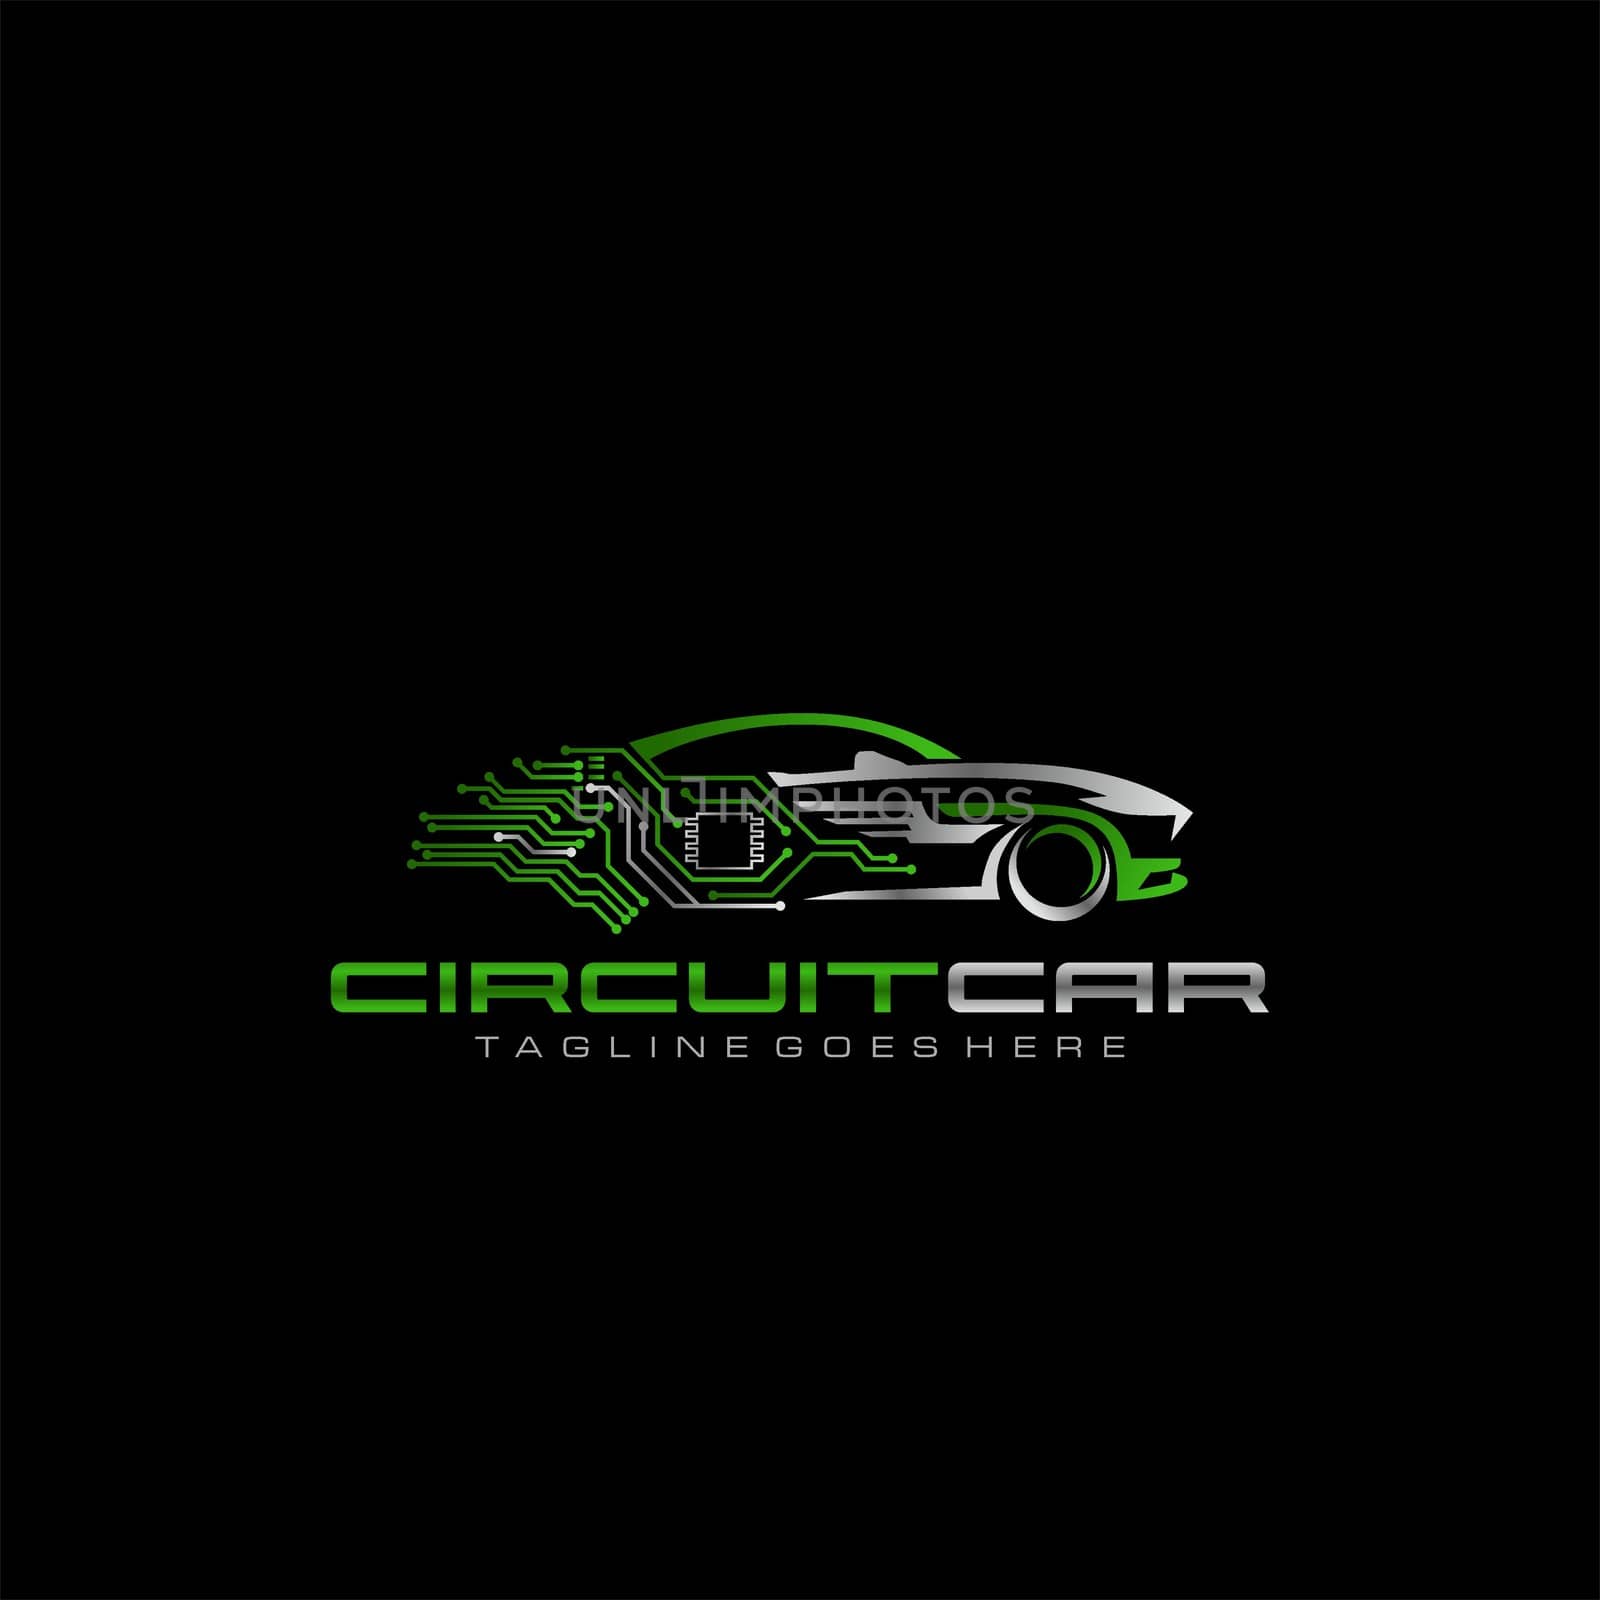 high tech car logo concept. chip circuit board with sportcar elements stock illustration by IreIru